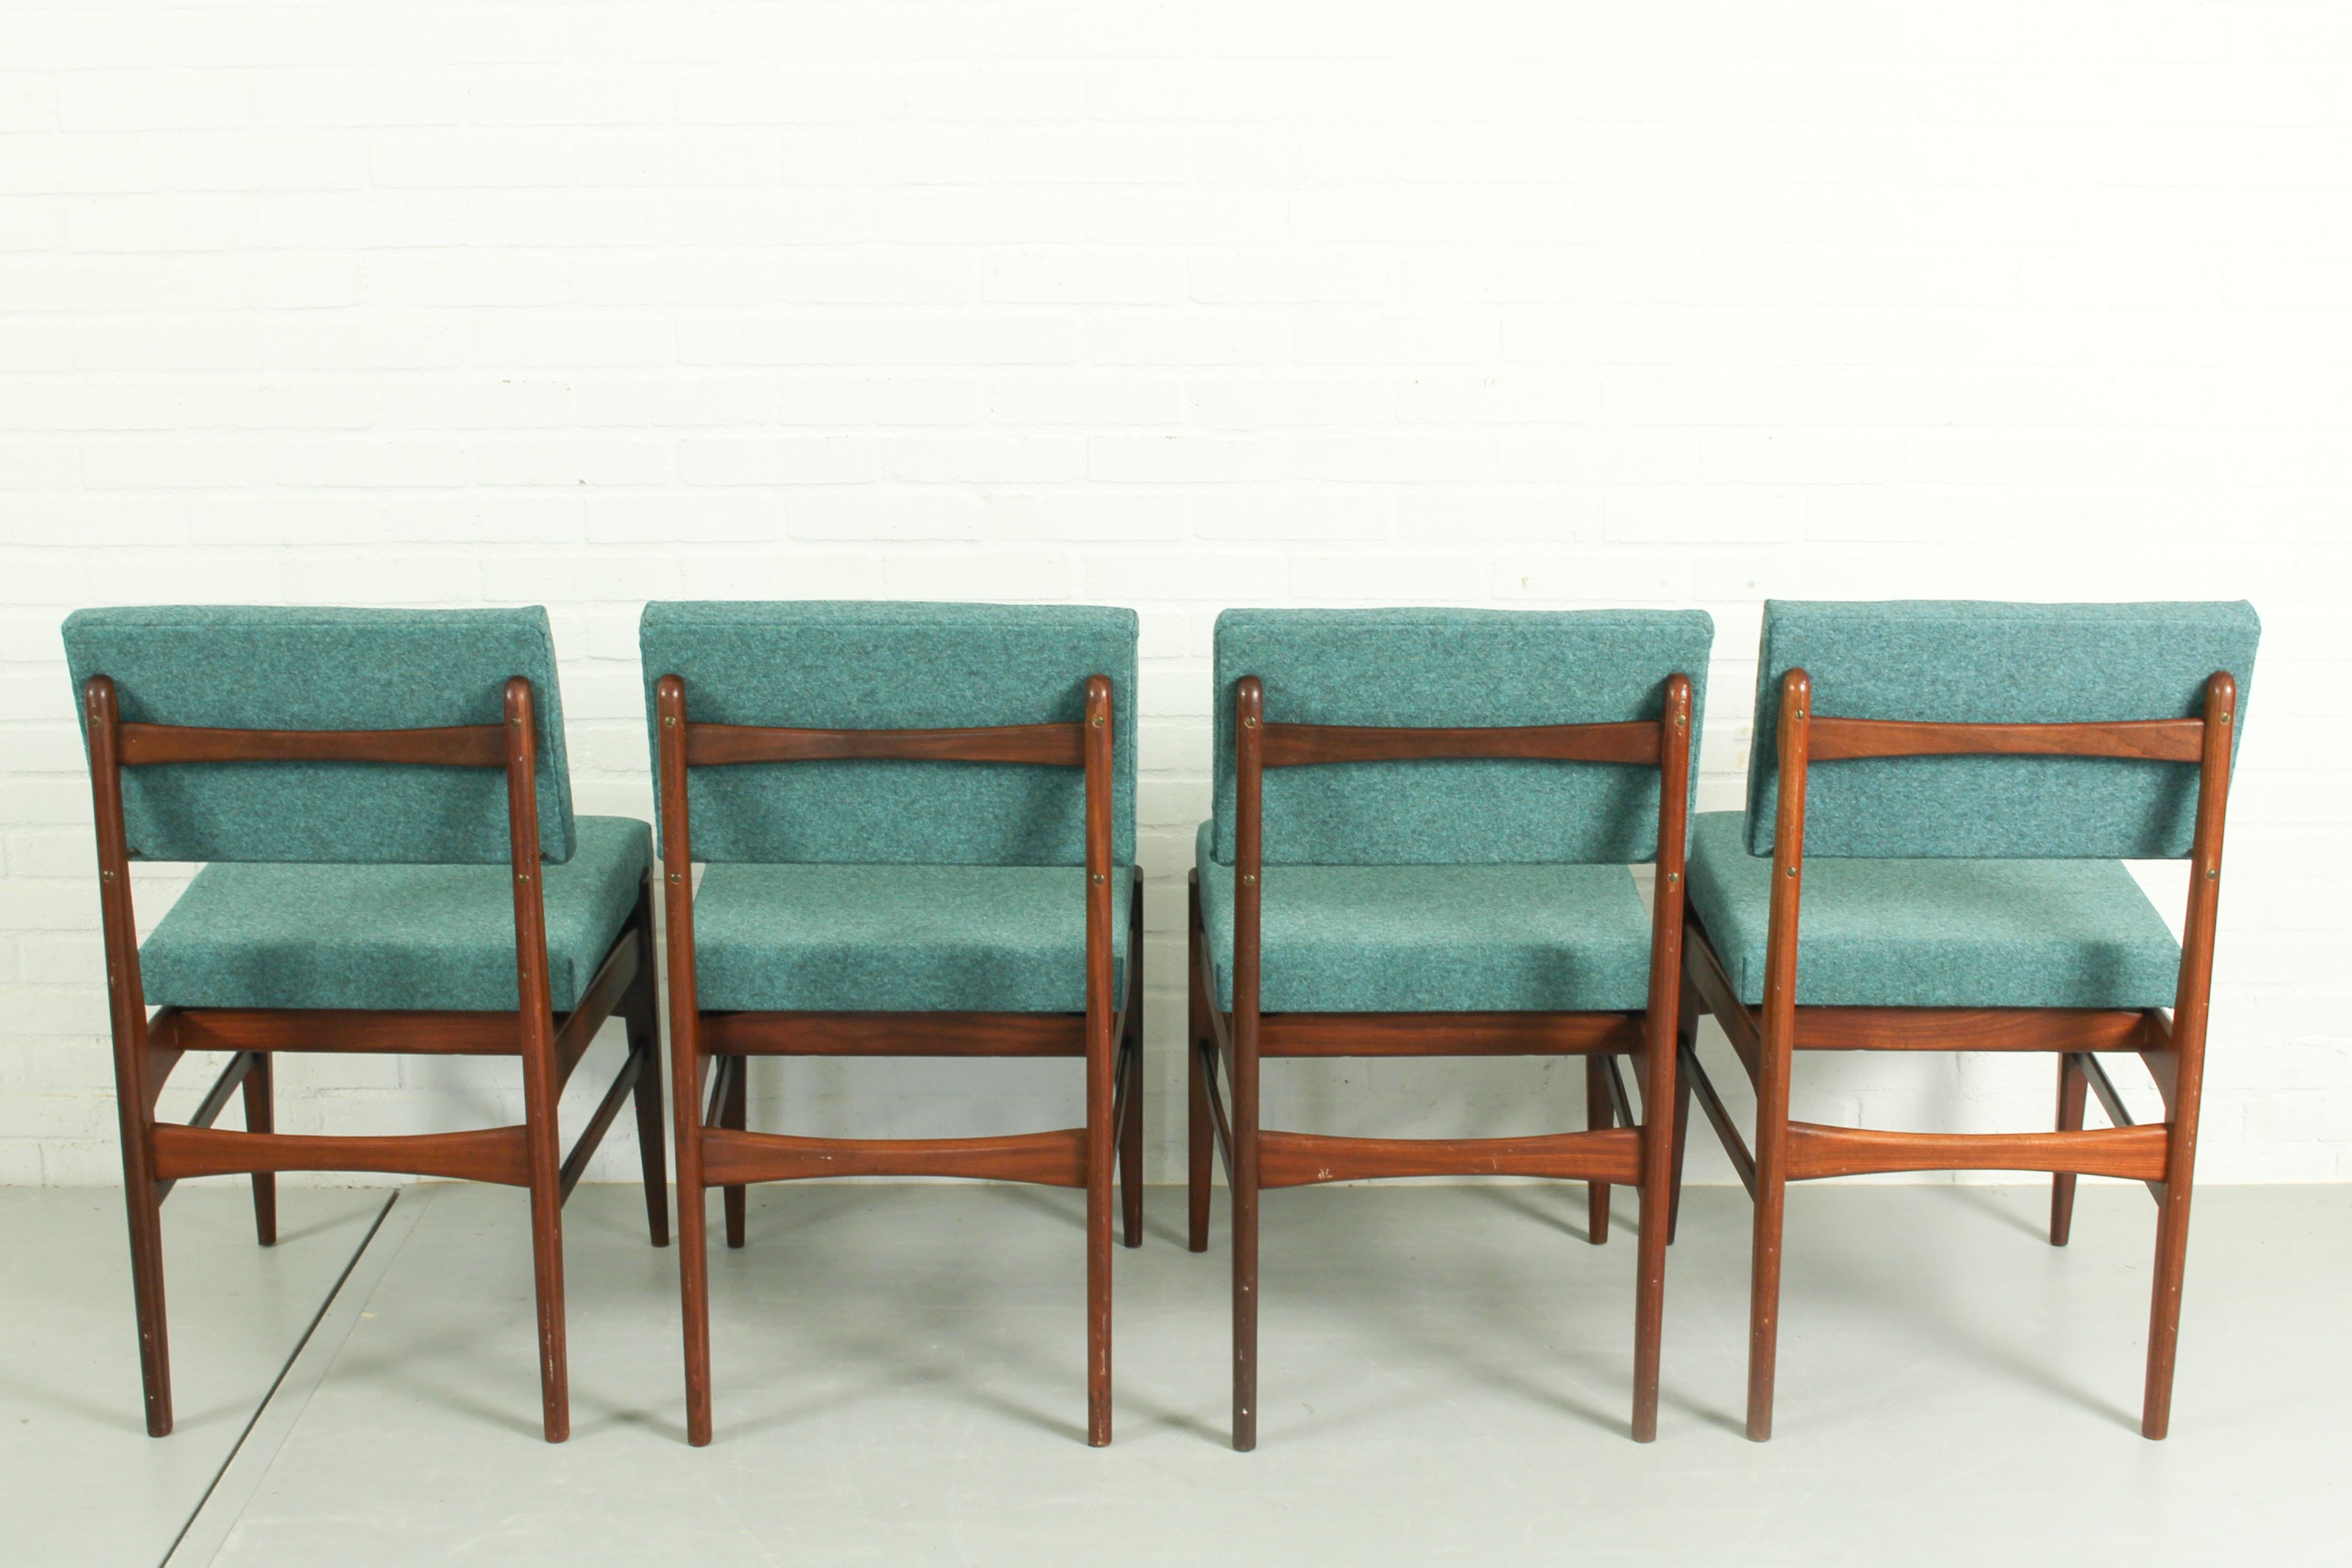 Dining chairs and Dining Table by Louis van Teeffelen for Wébé, The Netherlands  In Good Condition For Sale In Appeltern, Gelderland